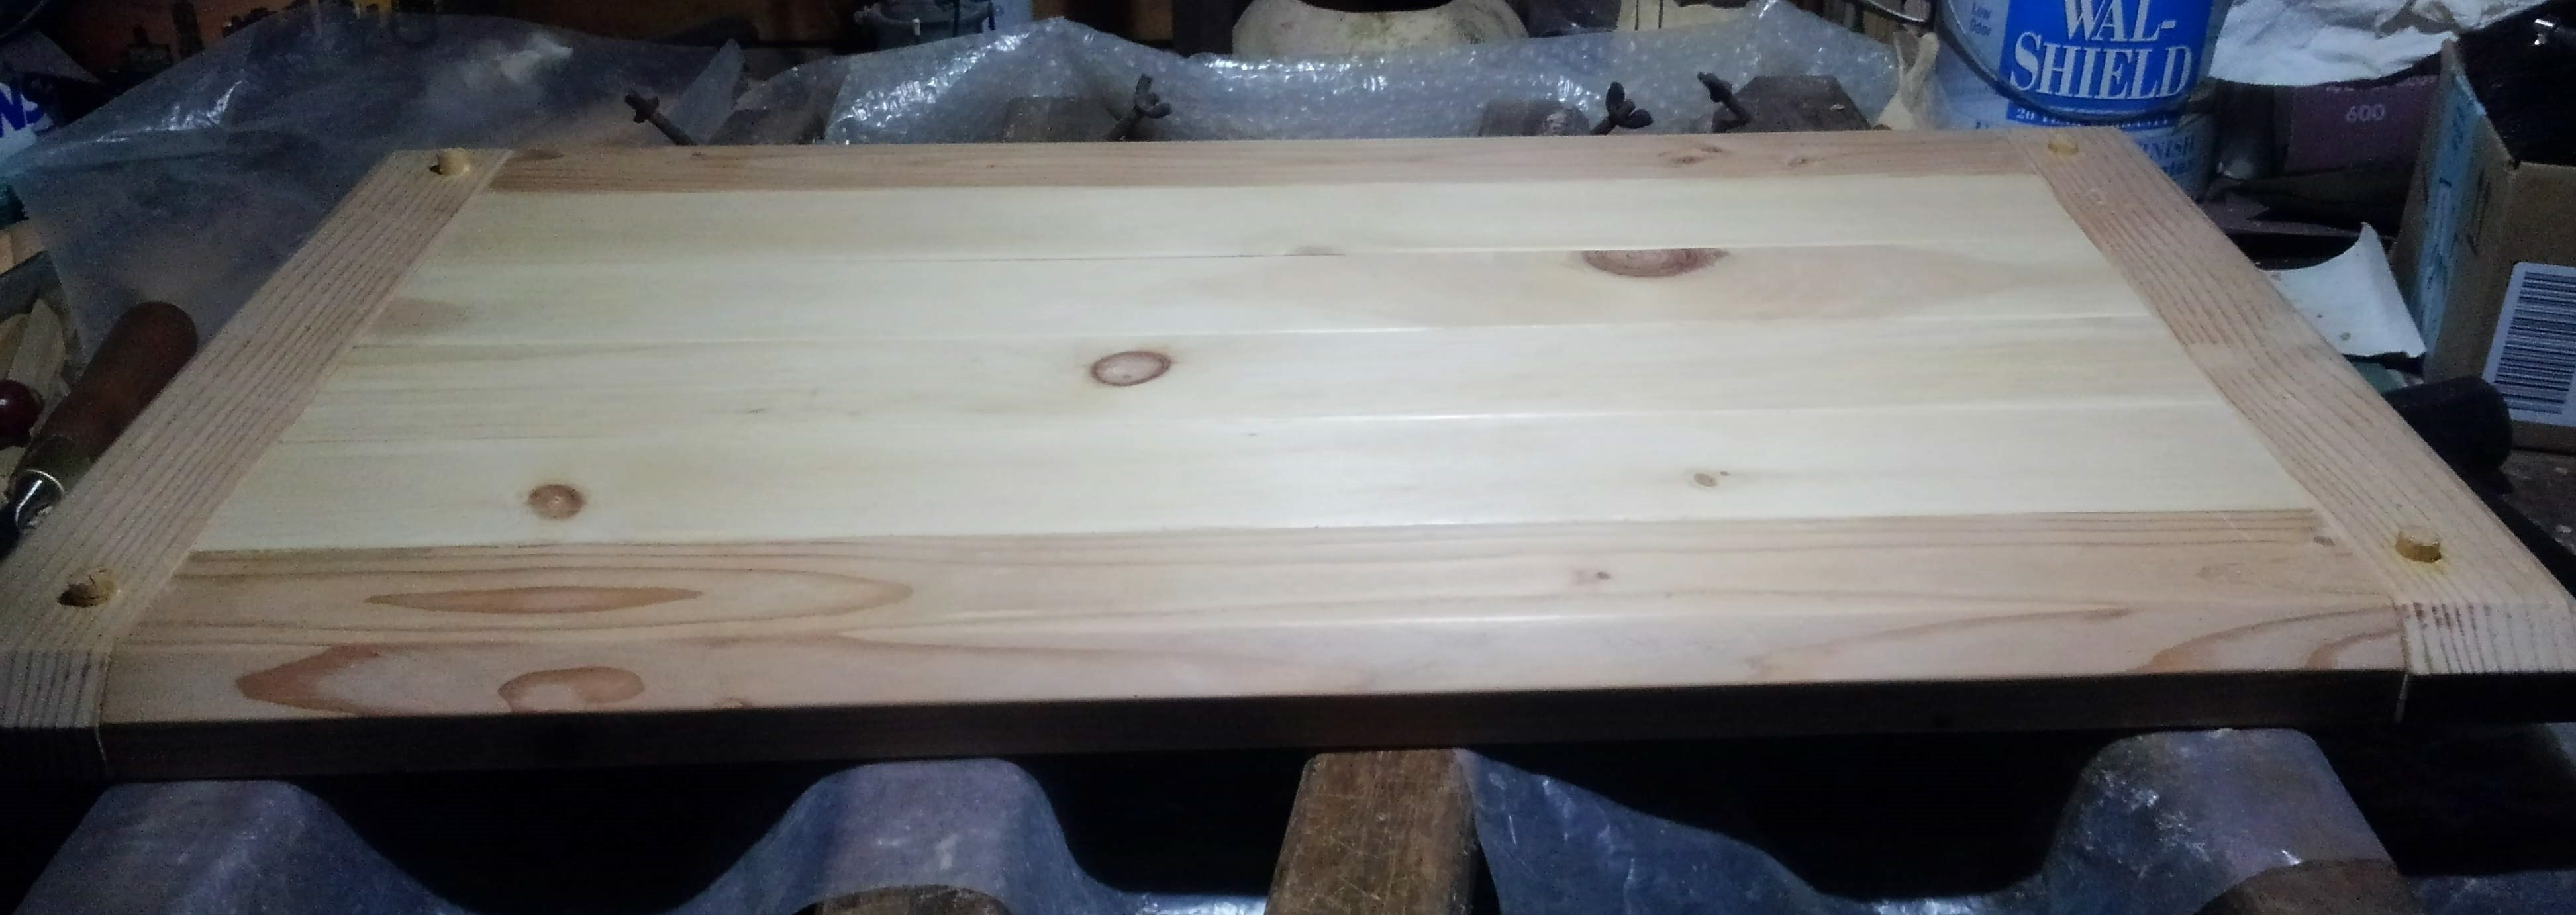 a chest lid with pegs driven into it